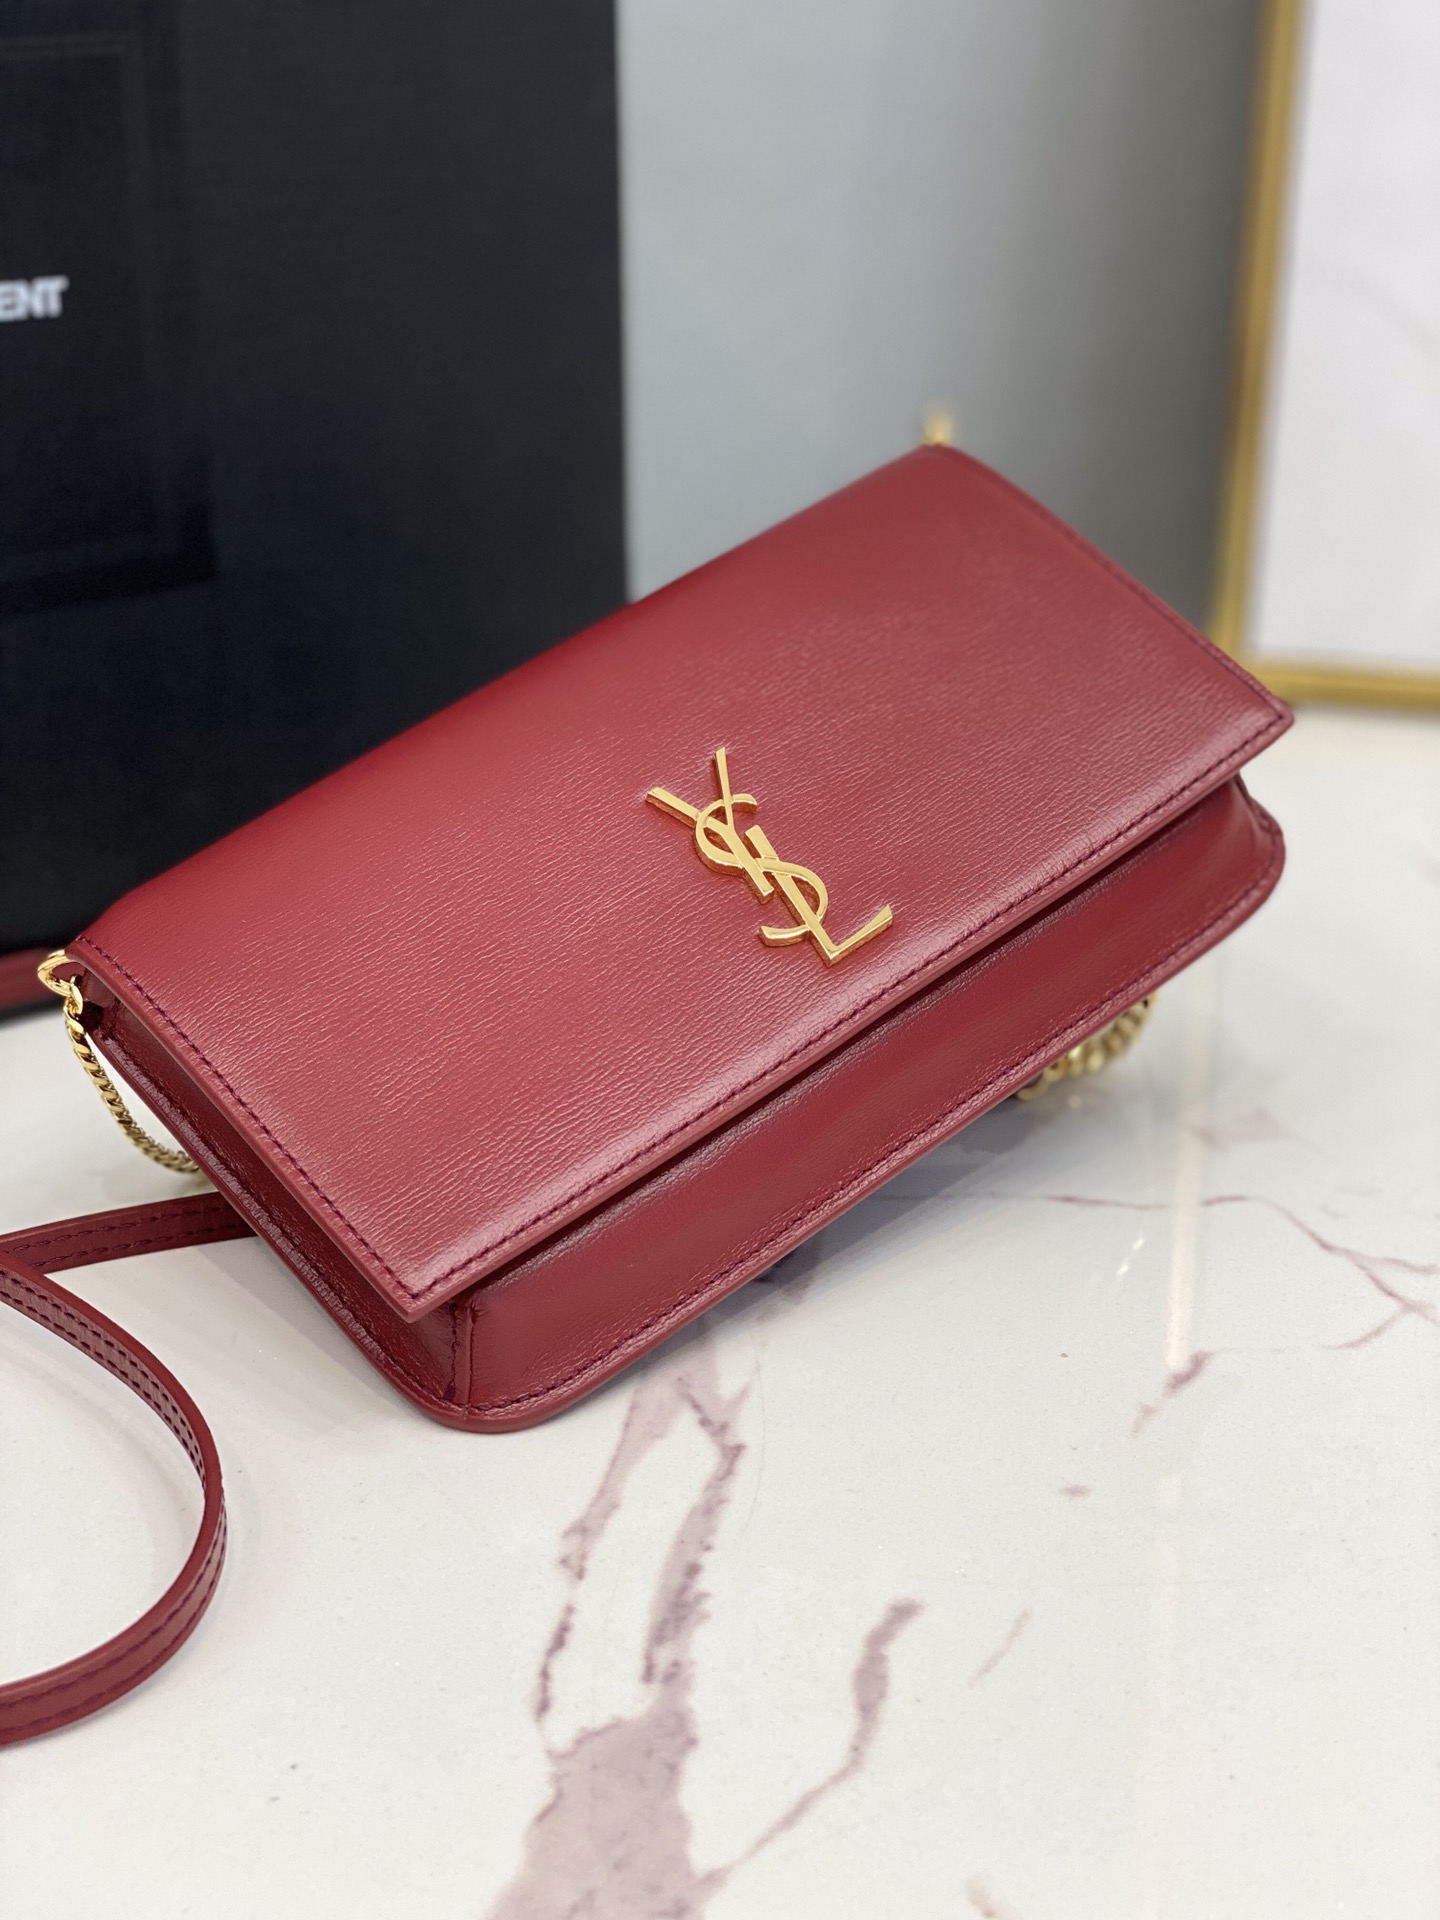 2020 cheap Saint Laurent monogram phone holder with strap in red smooth leather